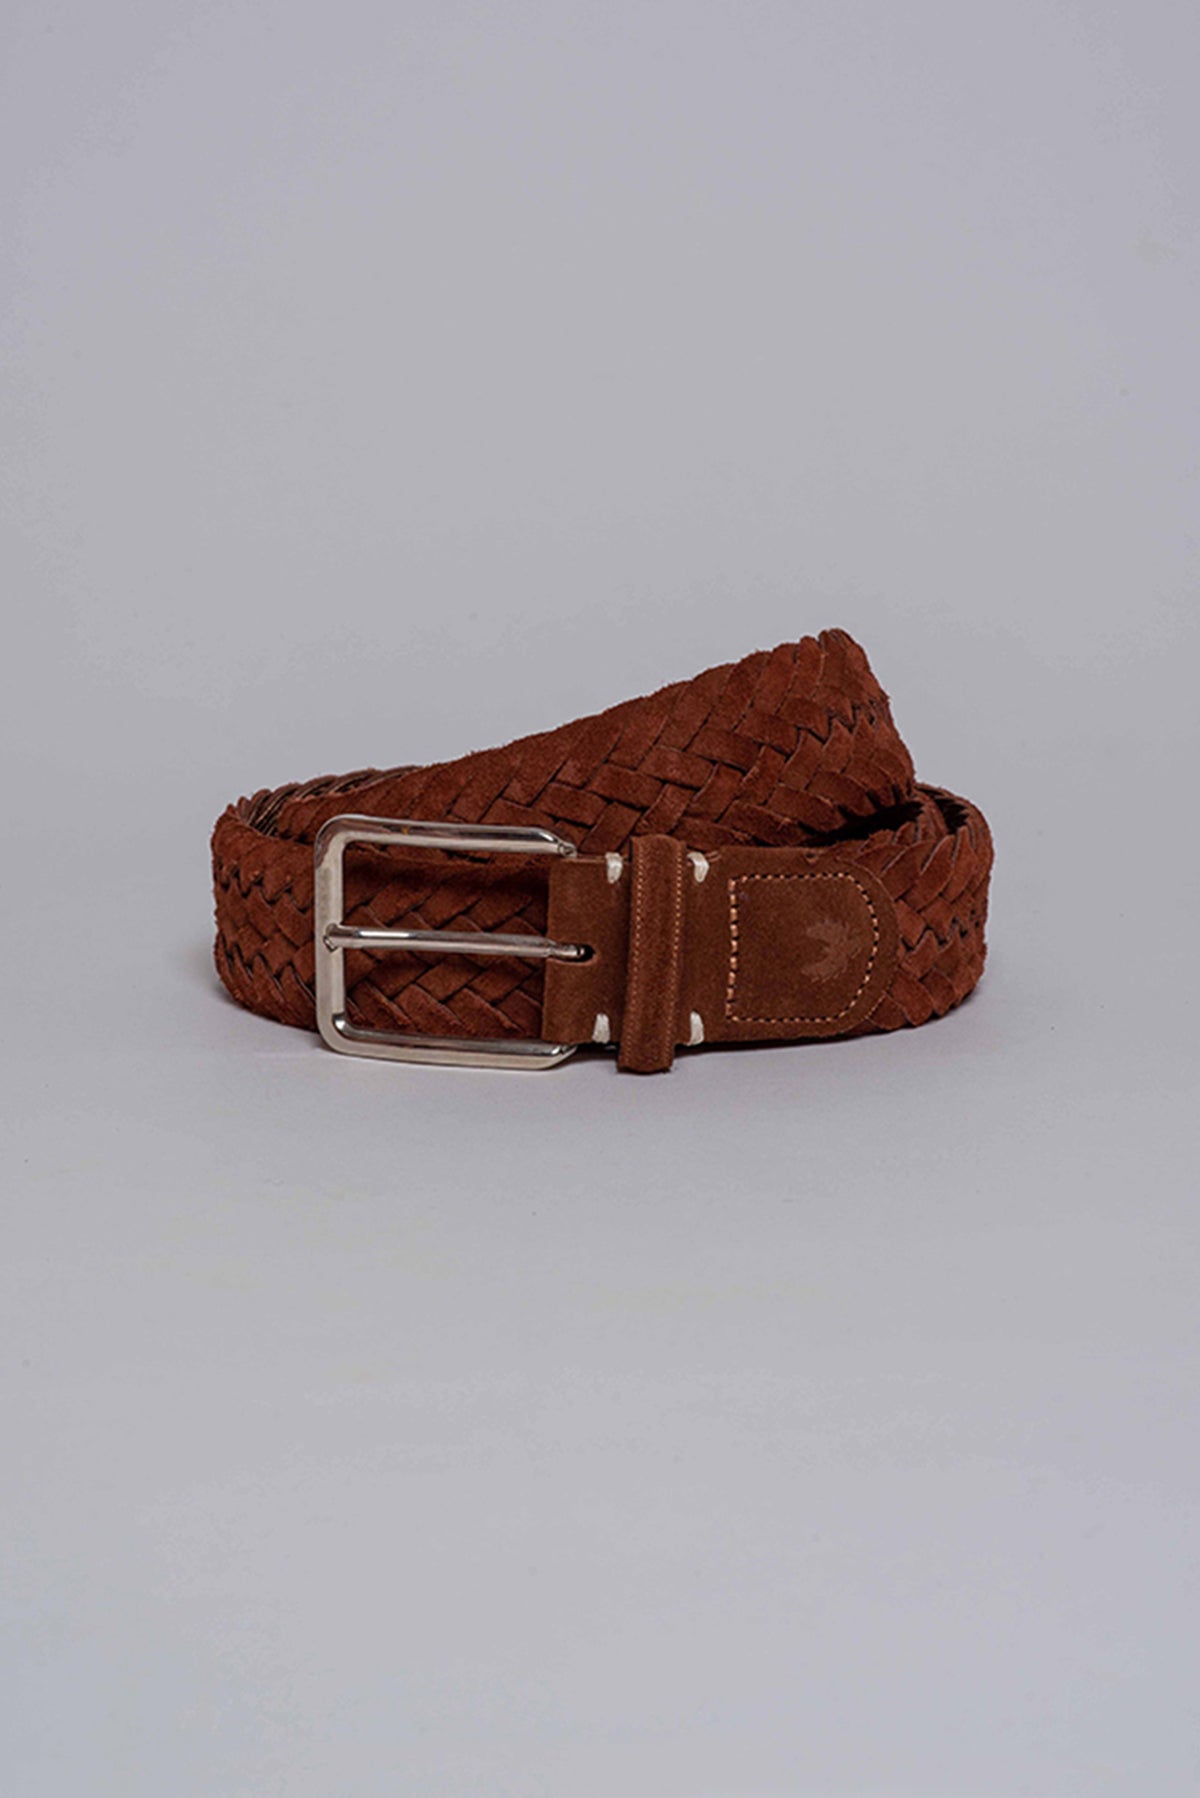 Brydon Brothers | Quality Handmade Handcrafted Belts